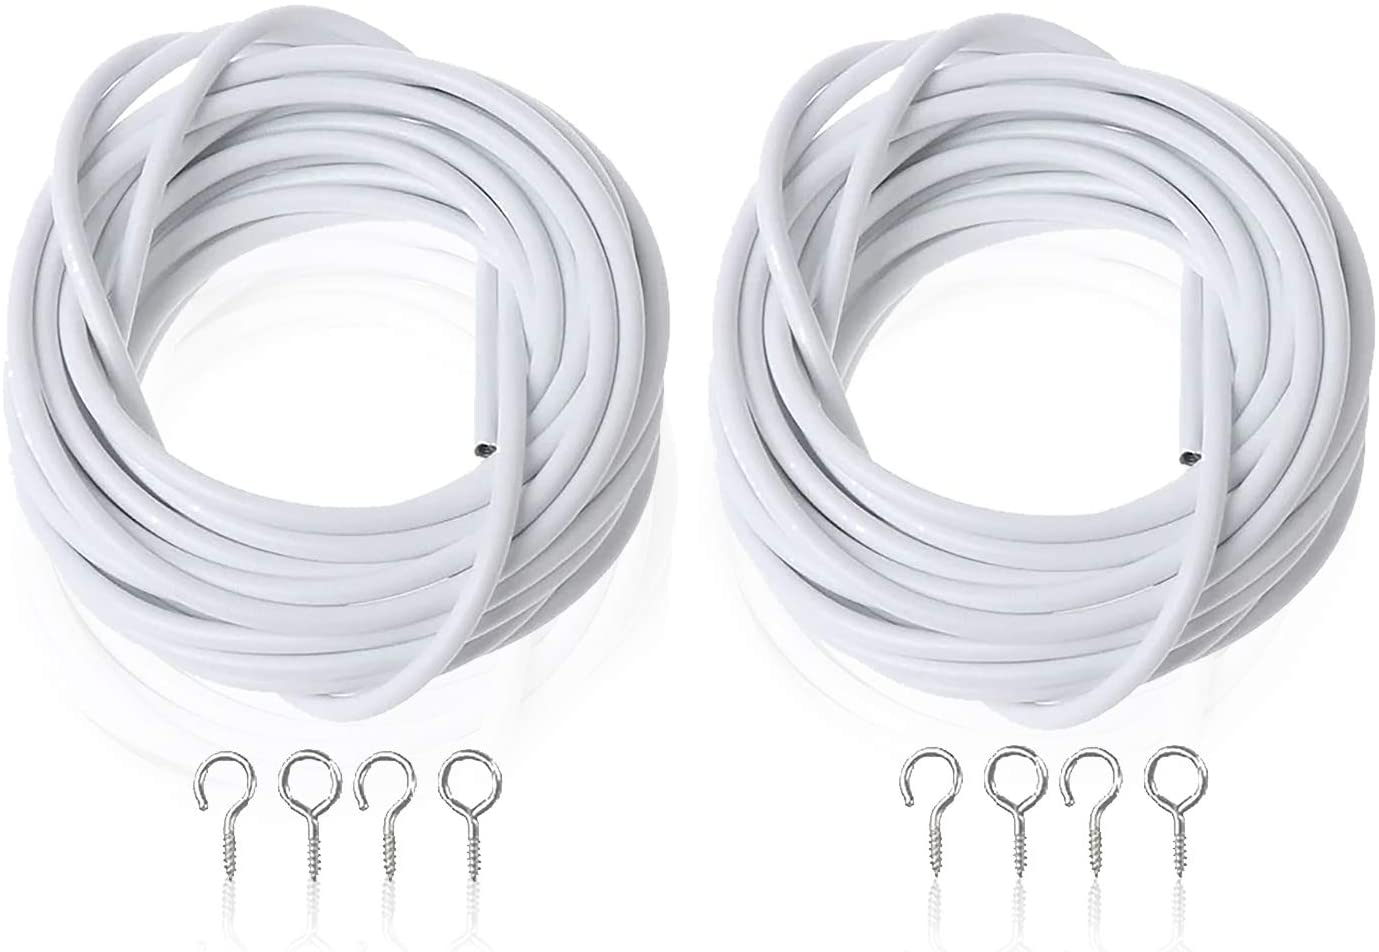 2 Pack Curtain Wire with 4 Pairs of Hooks & Eyes, Multi-Purpose Voile Wire/Cable, Cut to Size Net Curtain Wire 9